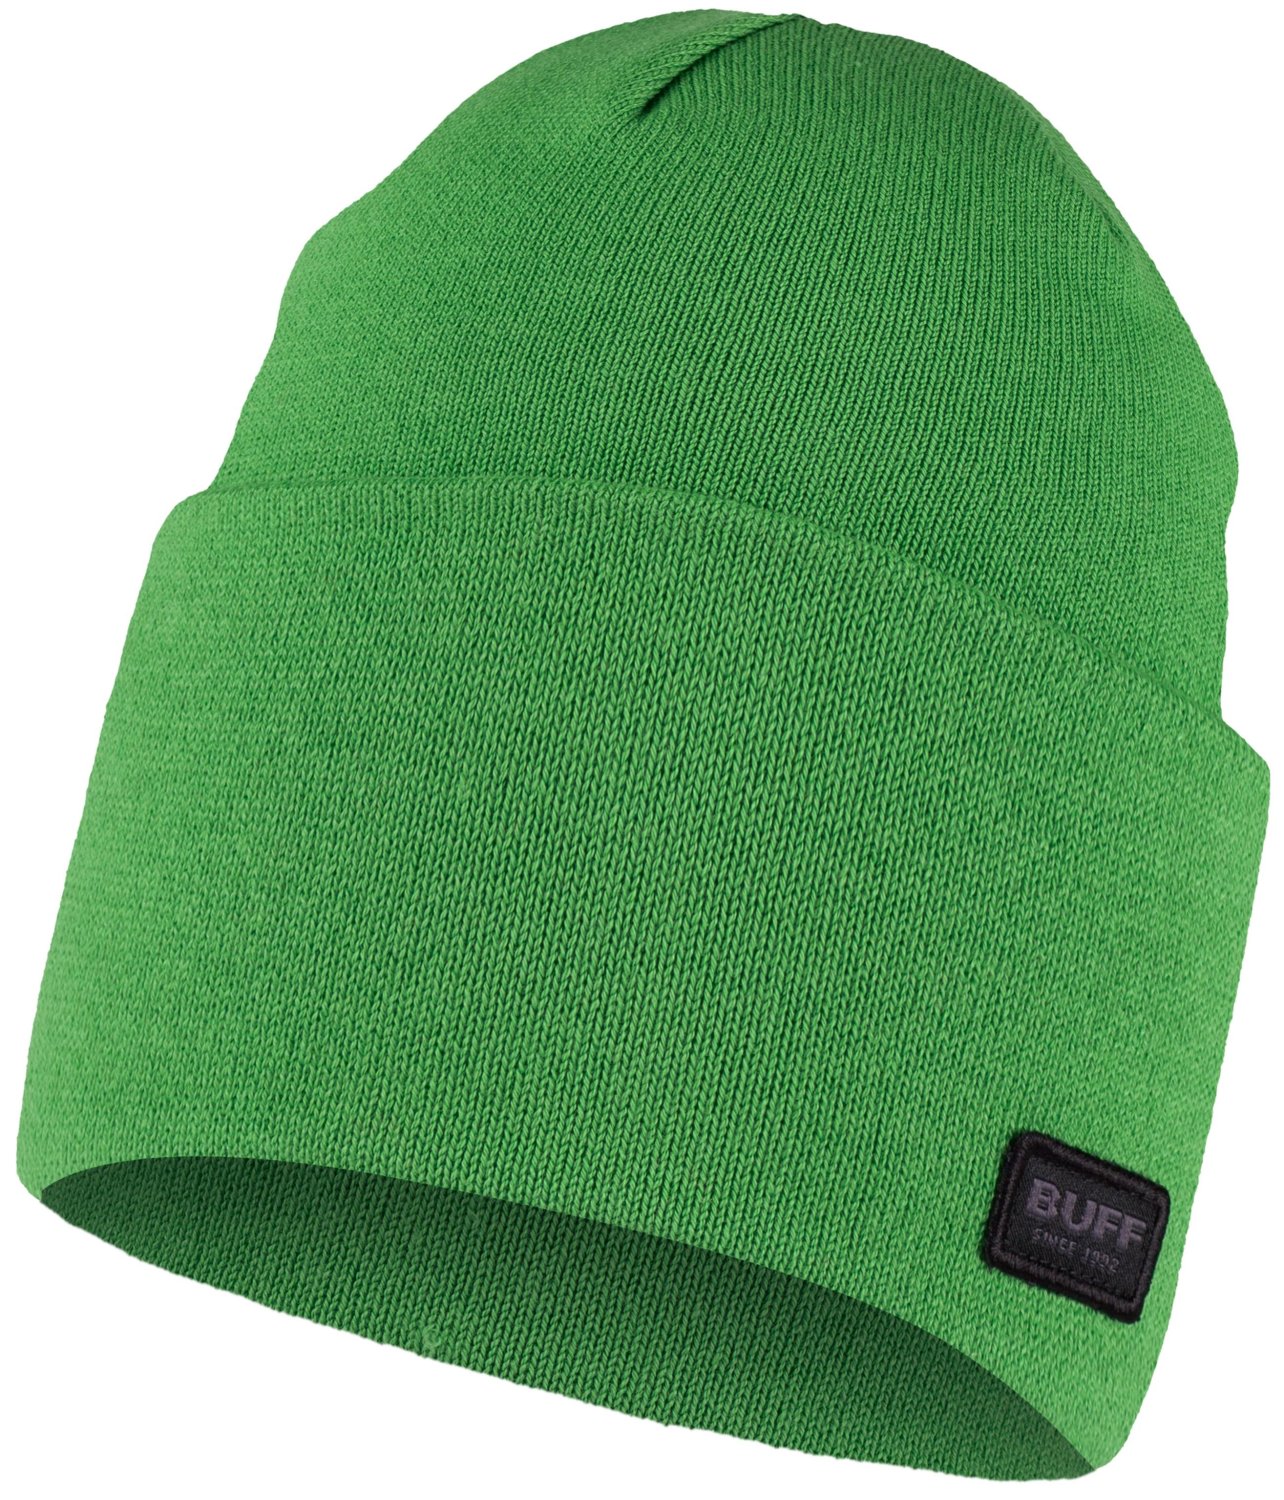 Шапка Buff Knitted Hat Niels Mint, US:one size, 126457.813.10.00 шапка buff knitted hat niels denim us one size 126457 788 10 00